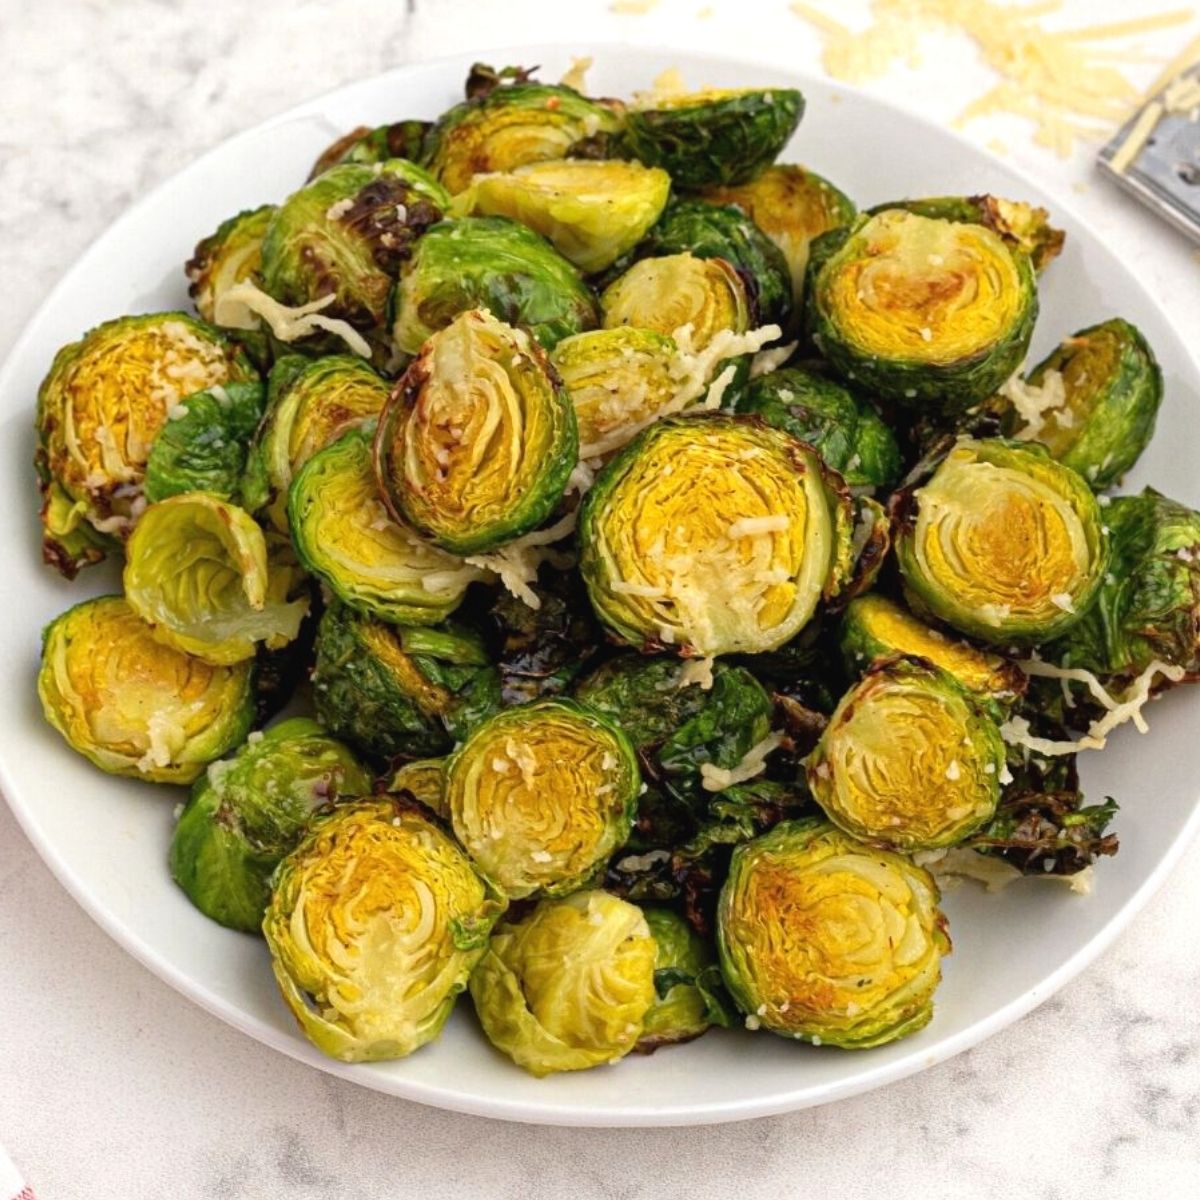 Bright green and crispy brussel sprouts on a white plate sprinkled with parmesan cheese